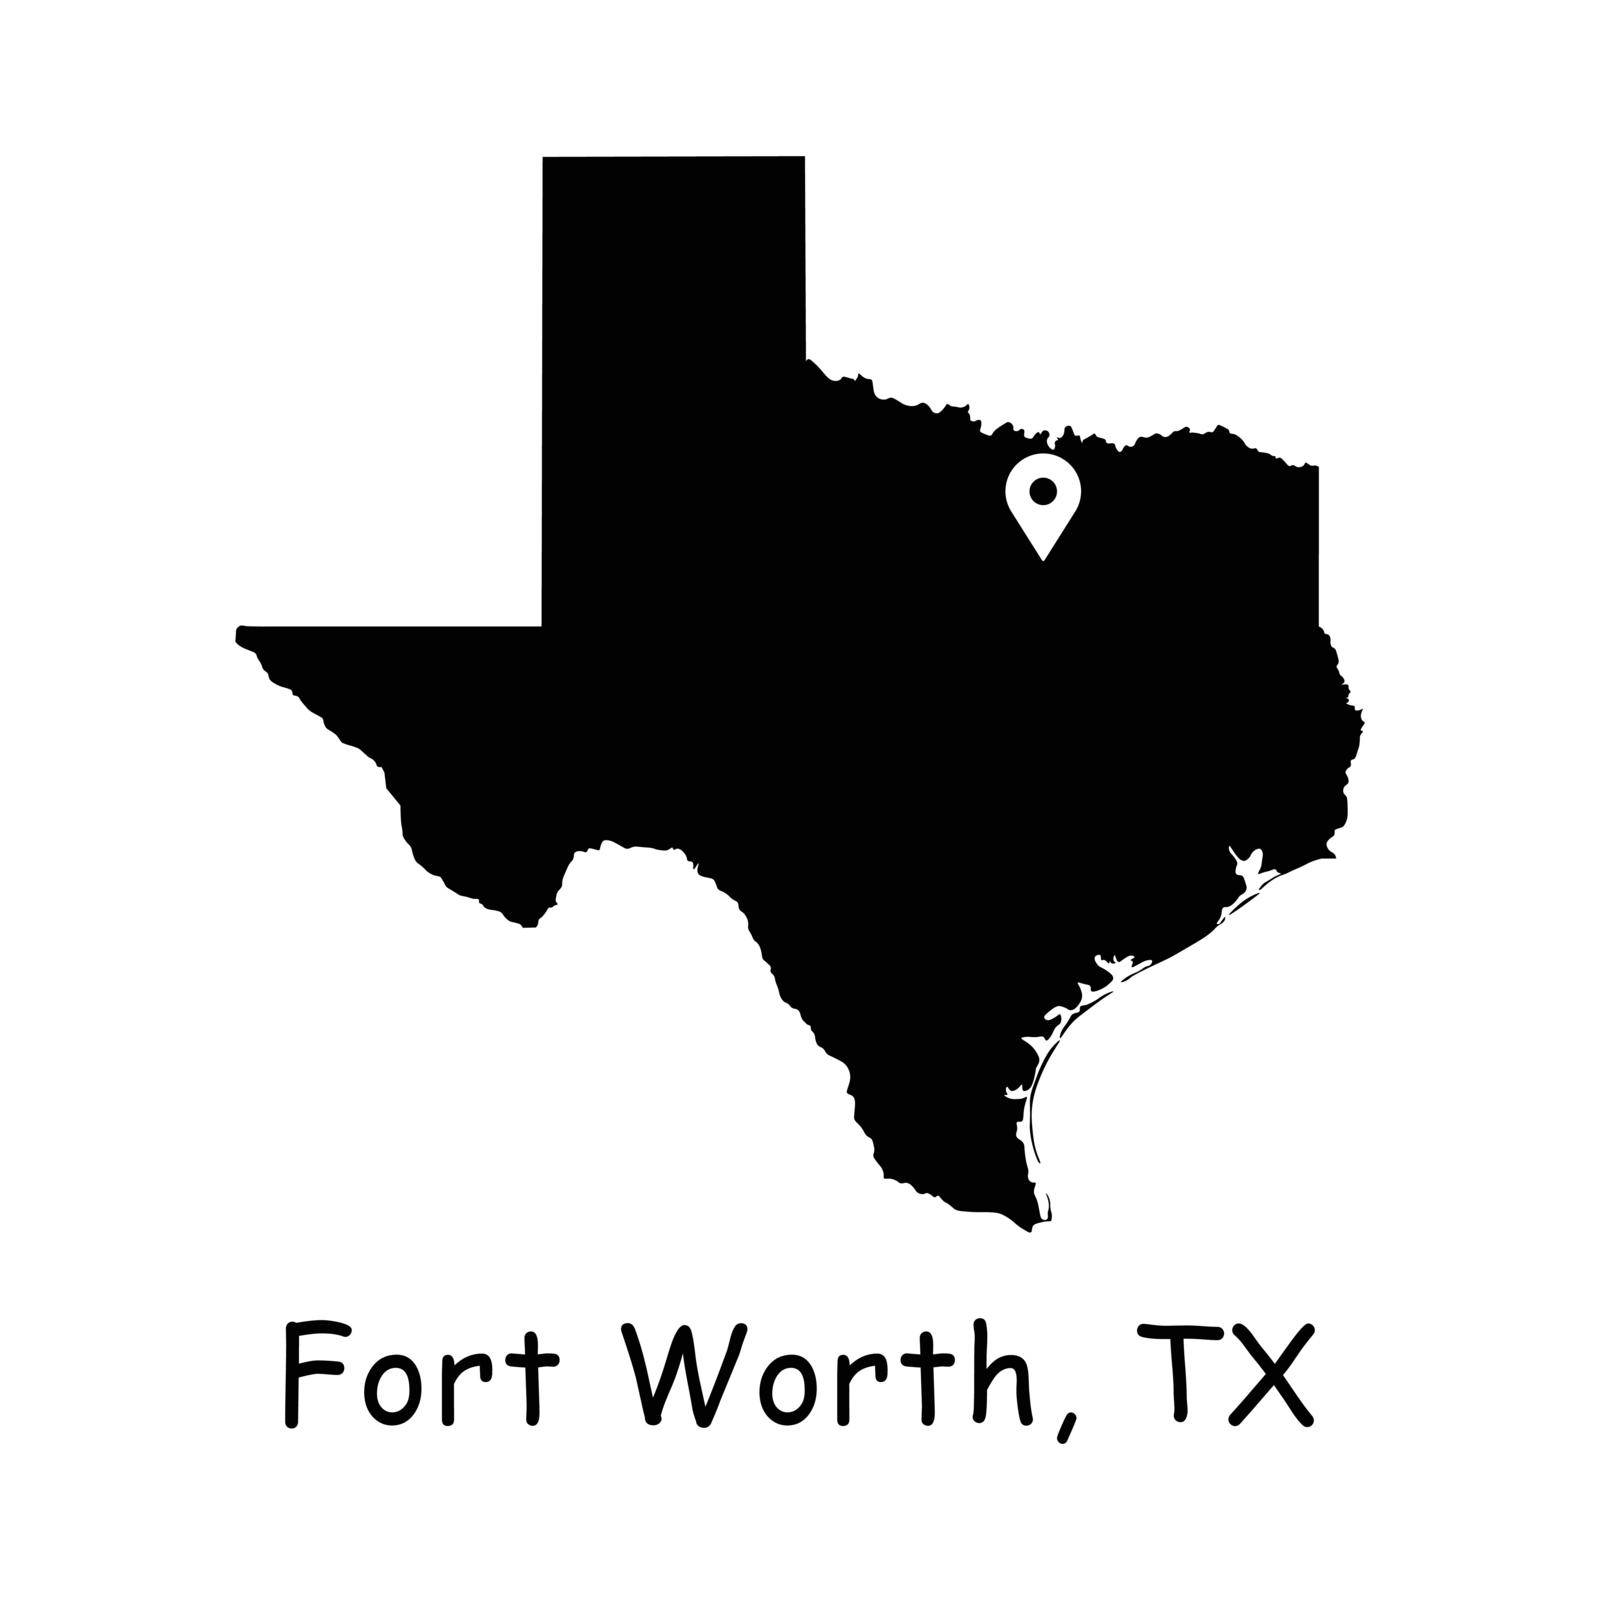 Fort Worth on Texas State Map. Detailed TX State Map with Location Pin on Fort Worth City. Black silhouette vector map isolated on white background.